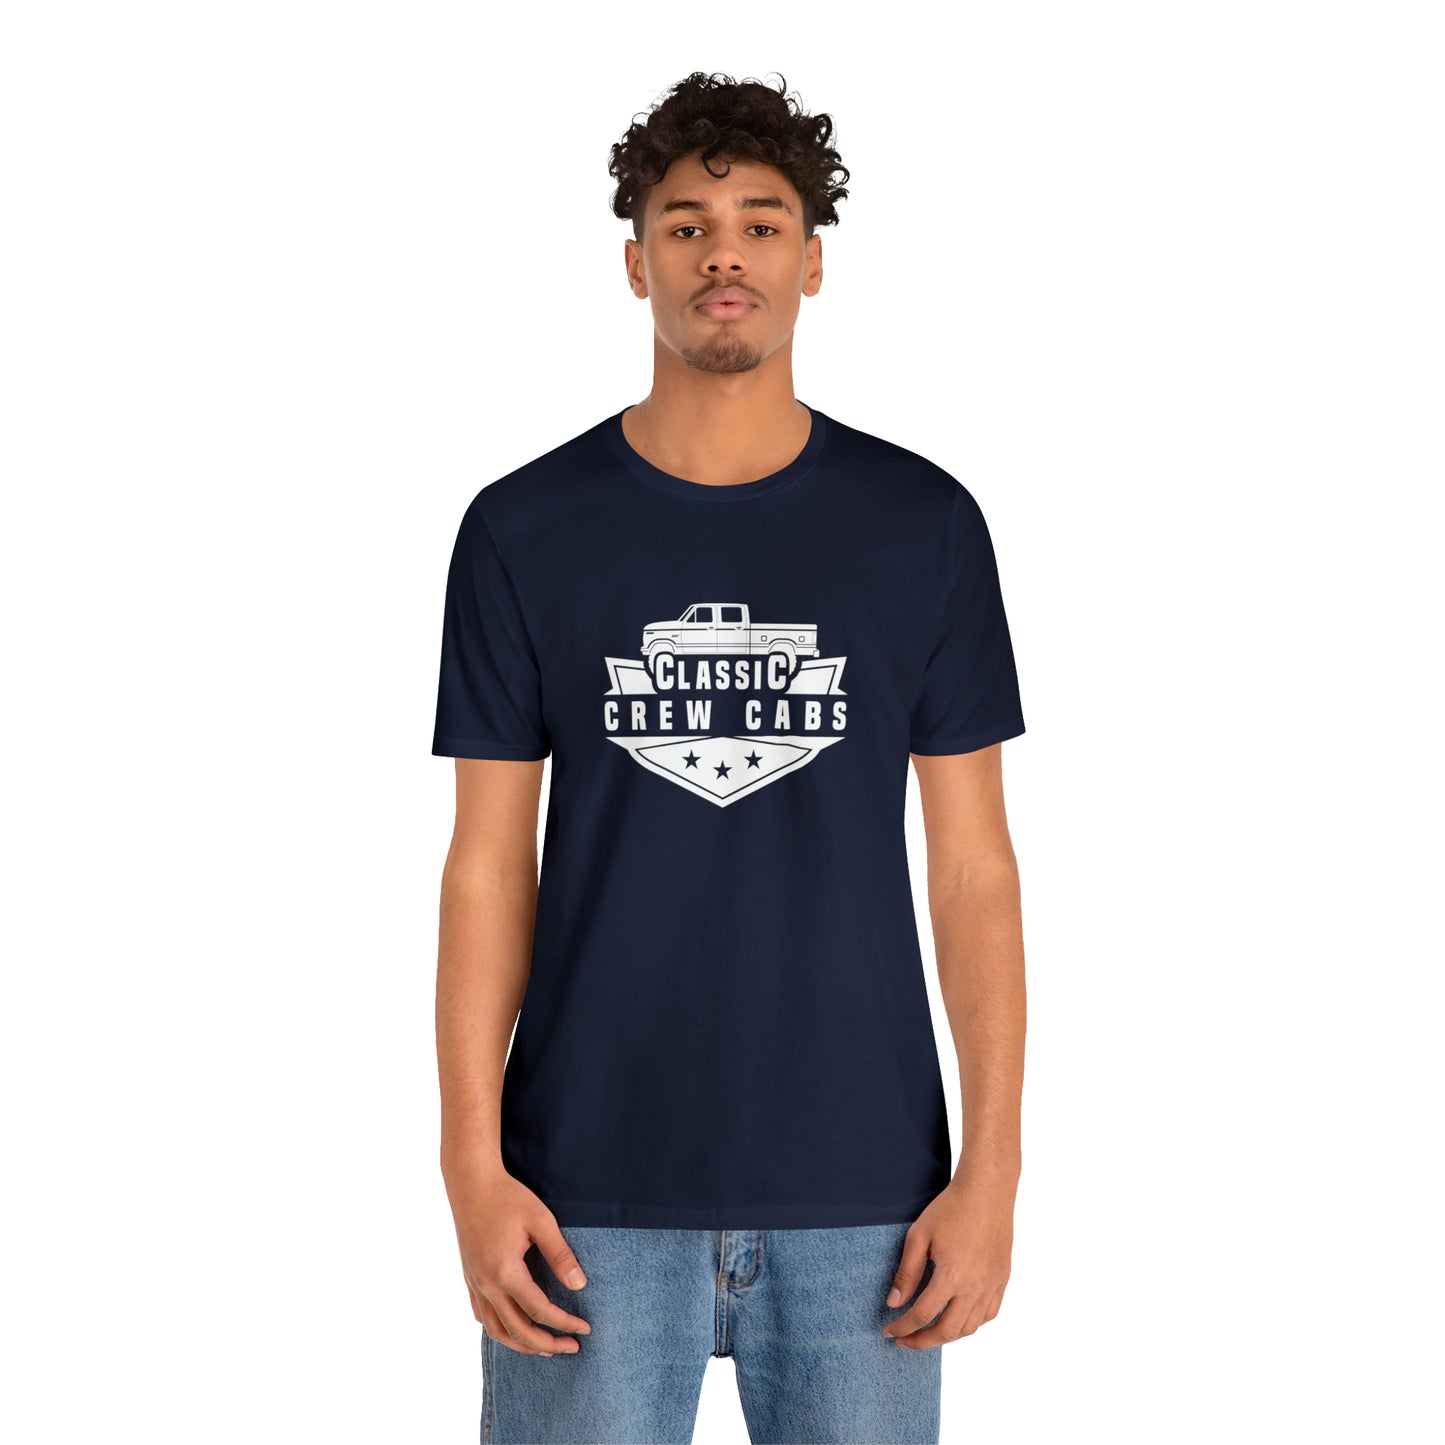 "6 Things I Like" Ford OBS Classic Crew Cab - Short Sleeve Tee